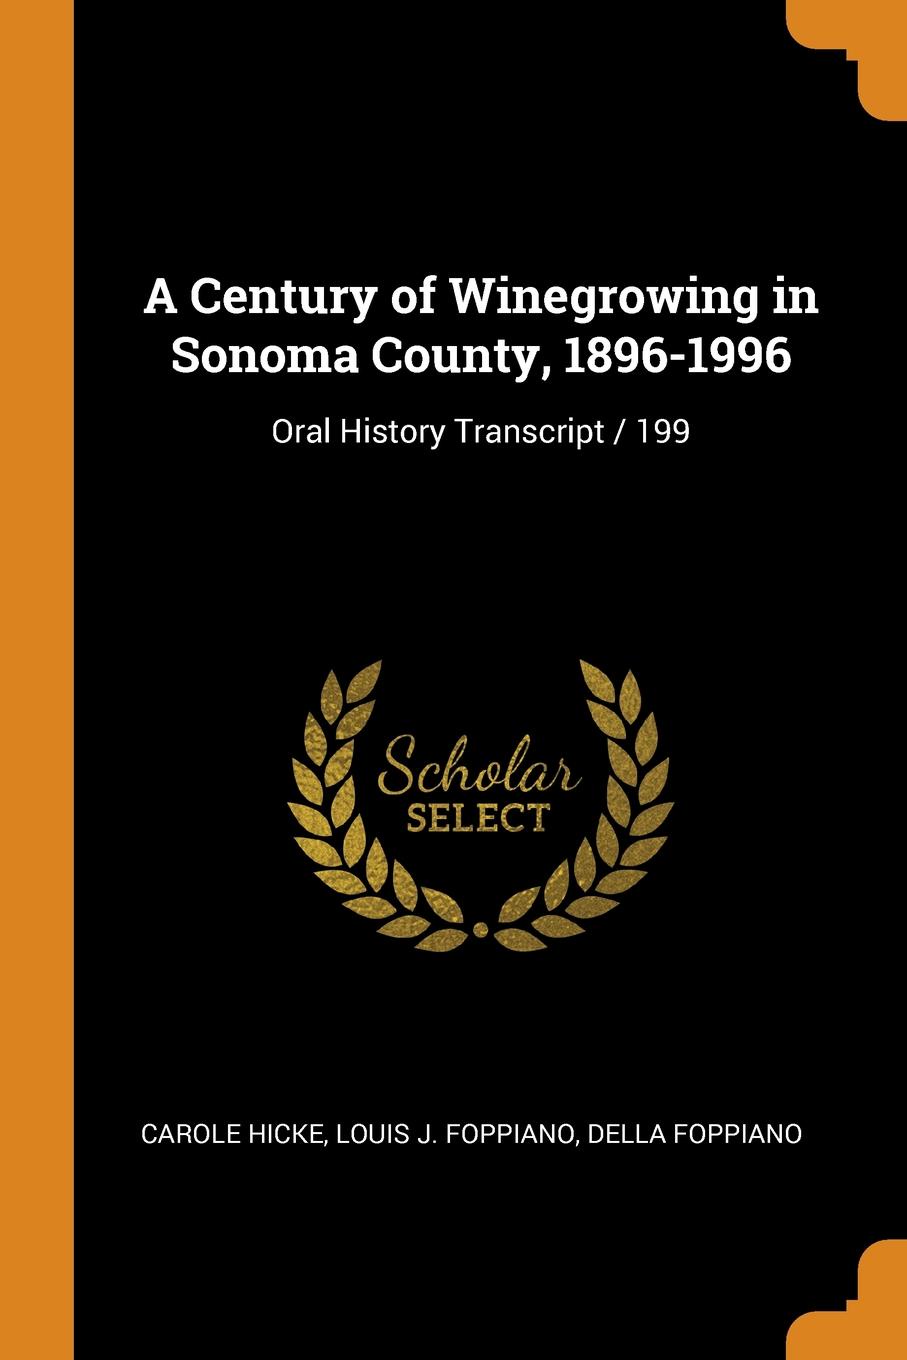 A Century of Winegrowing in Sonoma County, 1896-1996. Oral History Transcript / 199